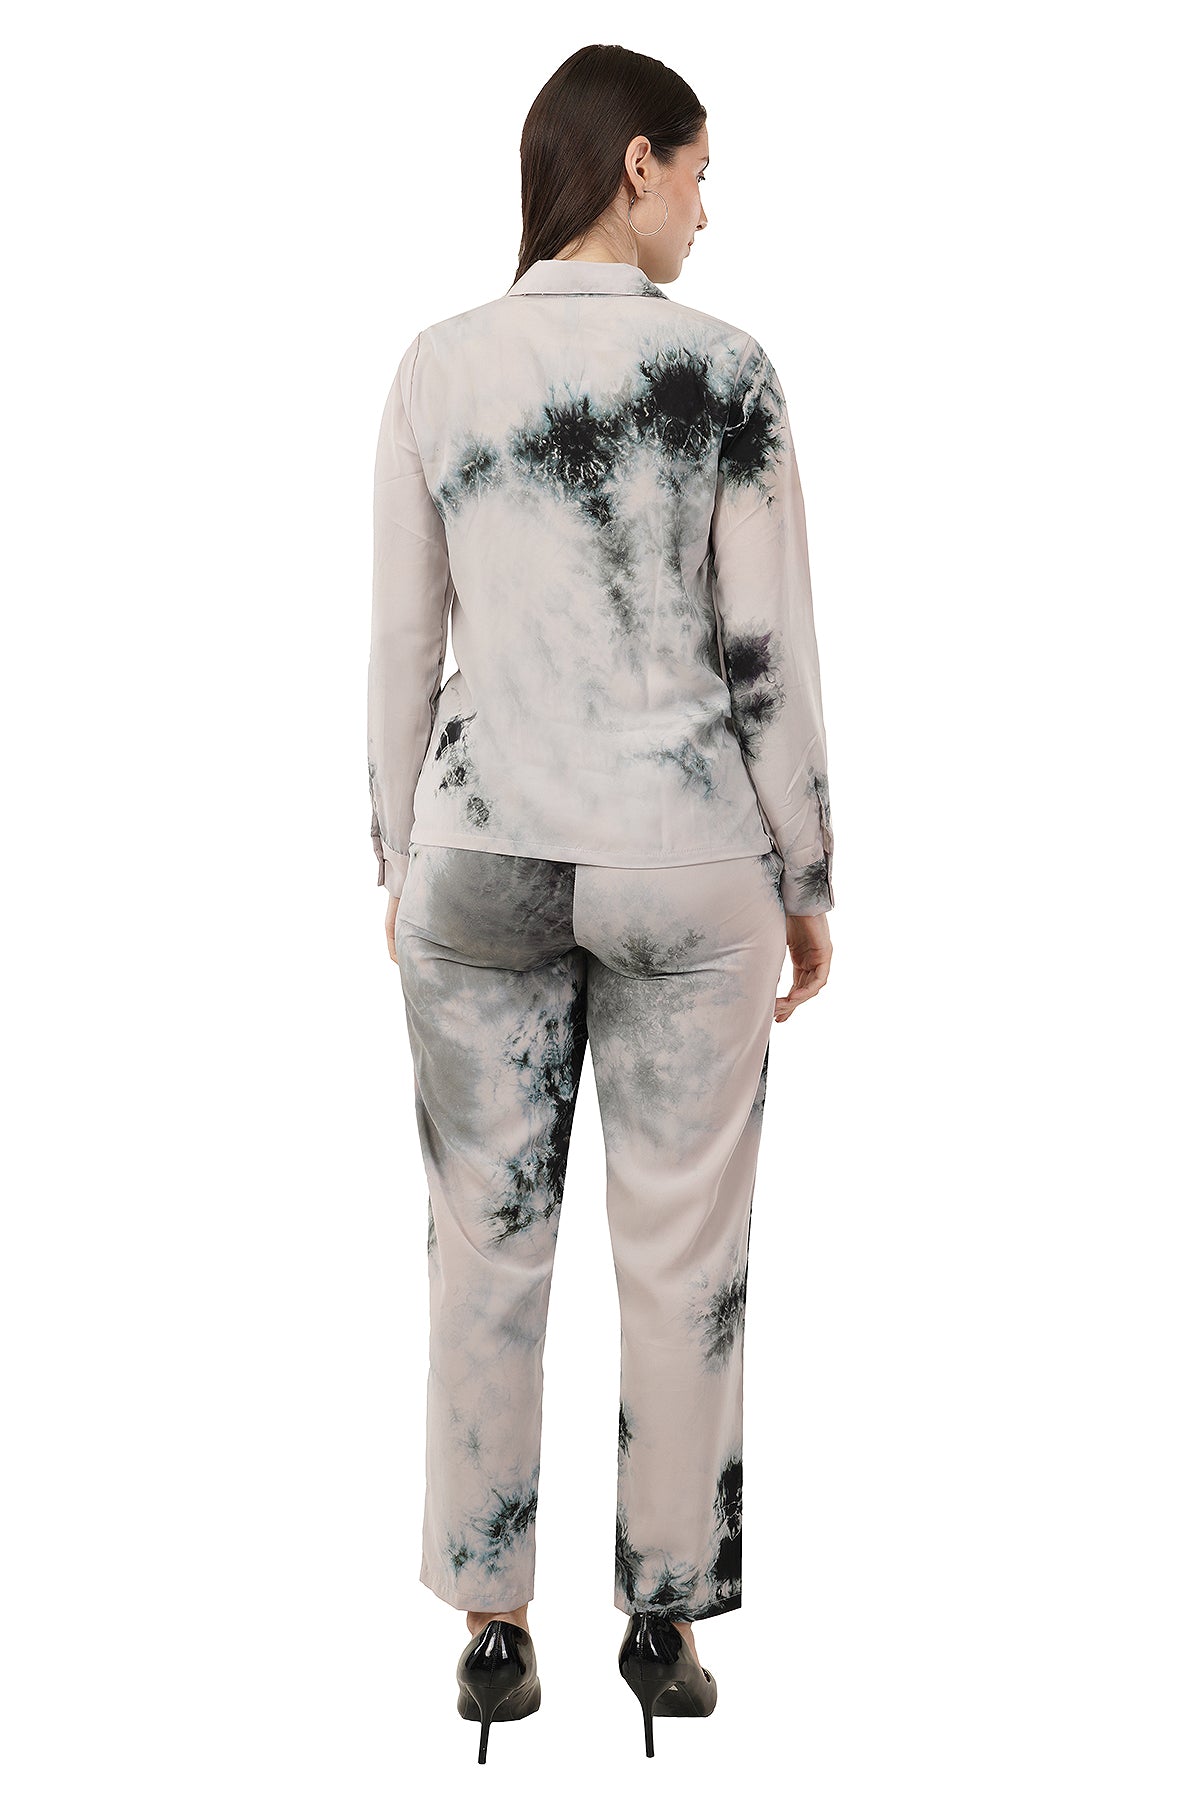 Grey Tie Dye Printed Imported Fabric Cord Set